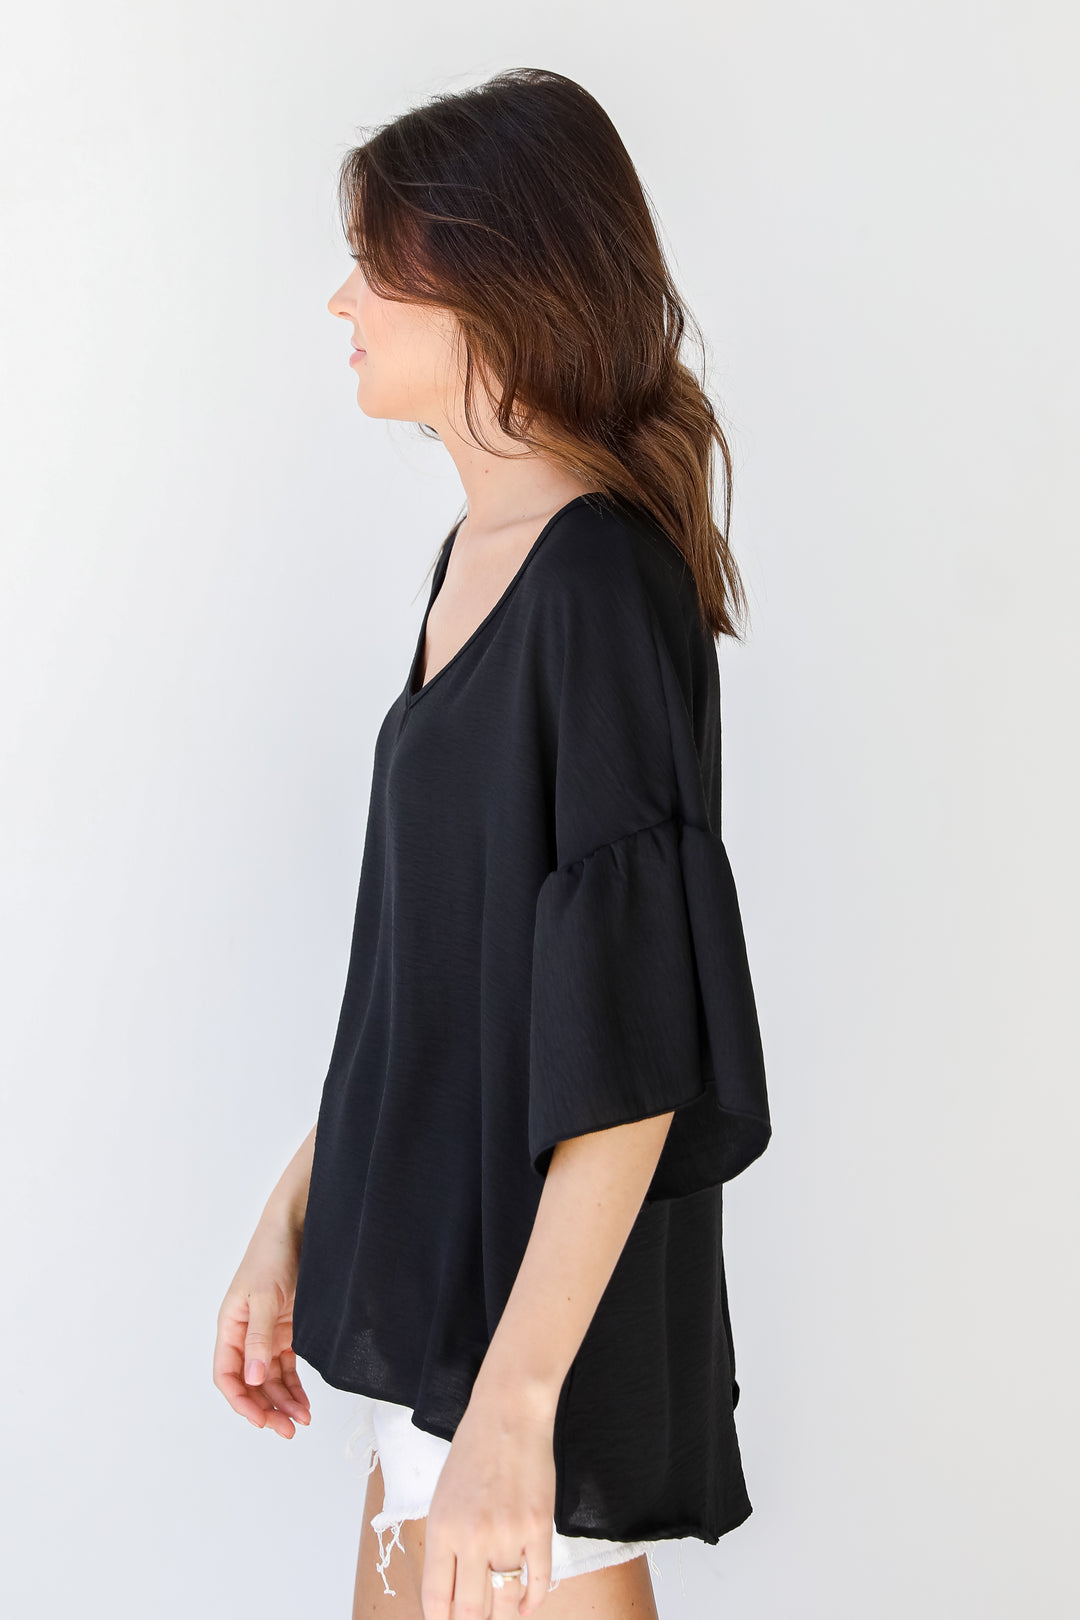 Ruffle Sleeve Blouse in black side view